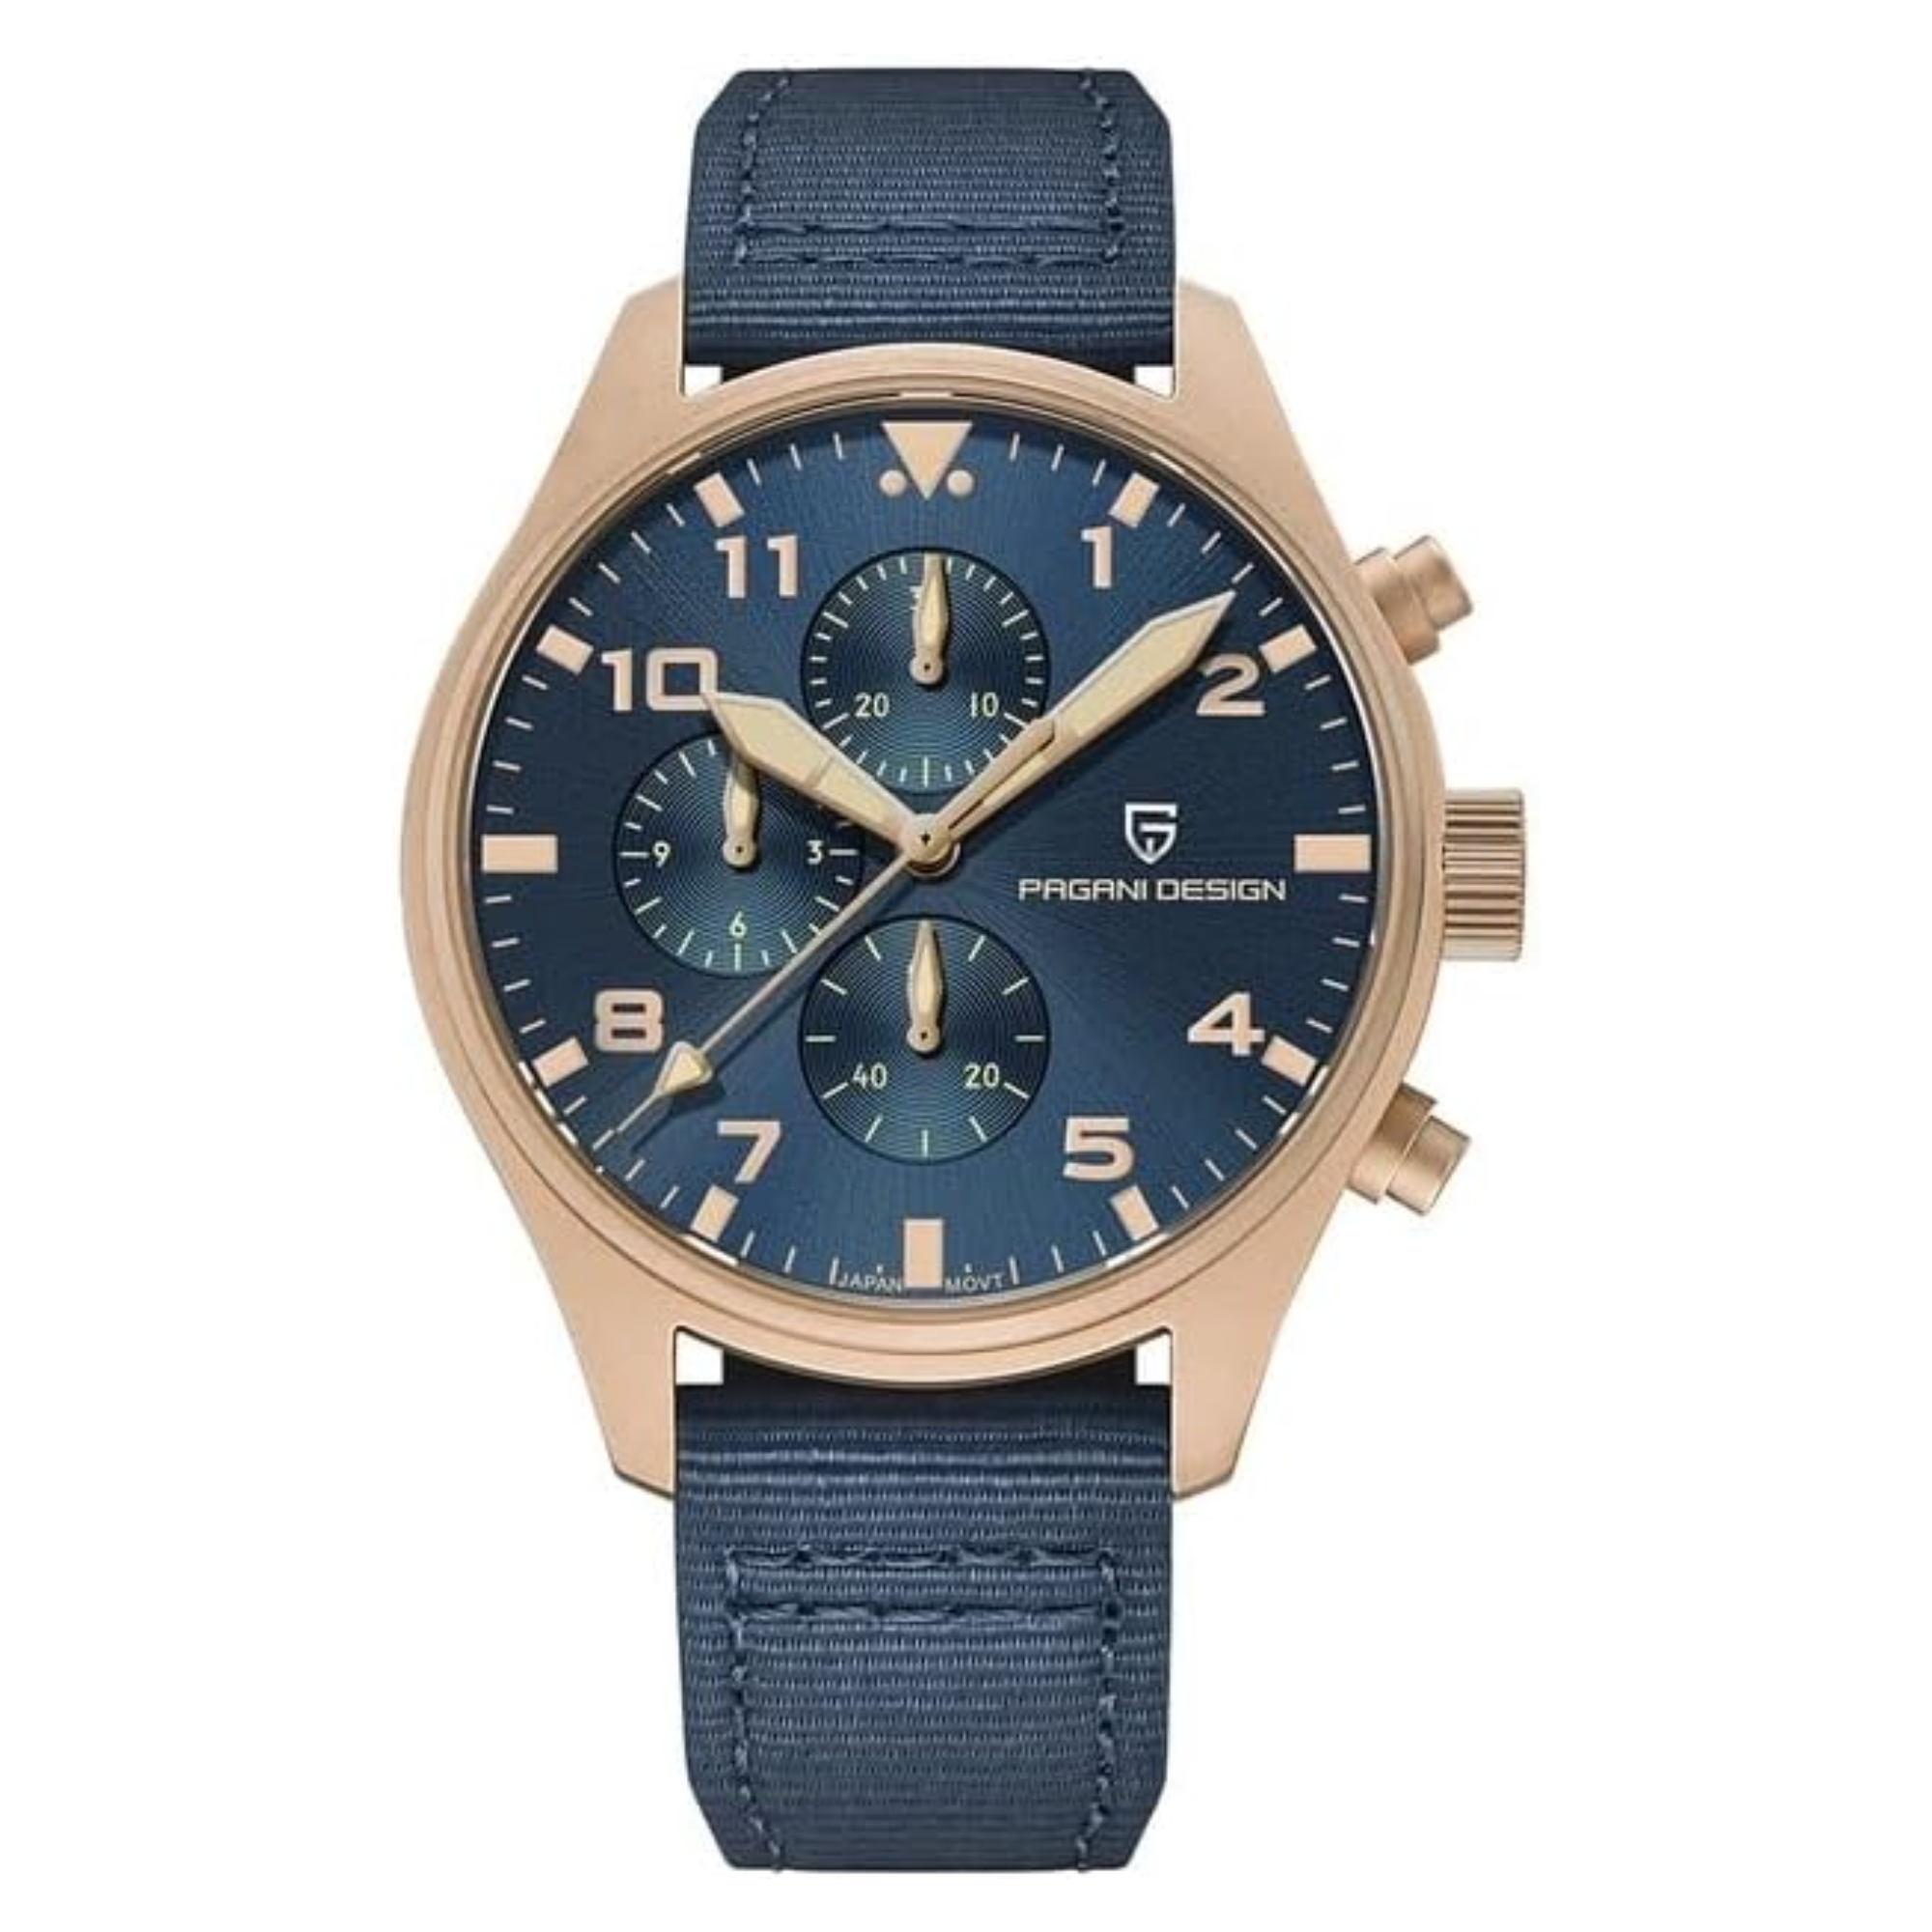 Pagani Design PD-1703 42MM Pilot Chronograph Men's with Seiko VK67 Quartz Watch with Crystal AR Coating - Blue Dial With Blue Nylon Strap